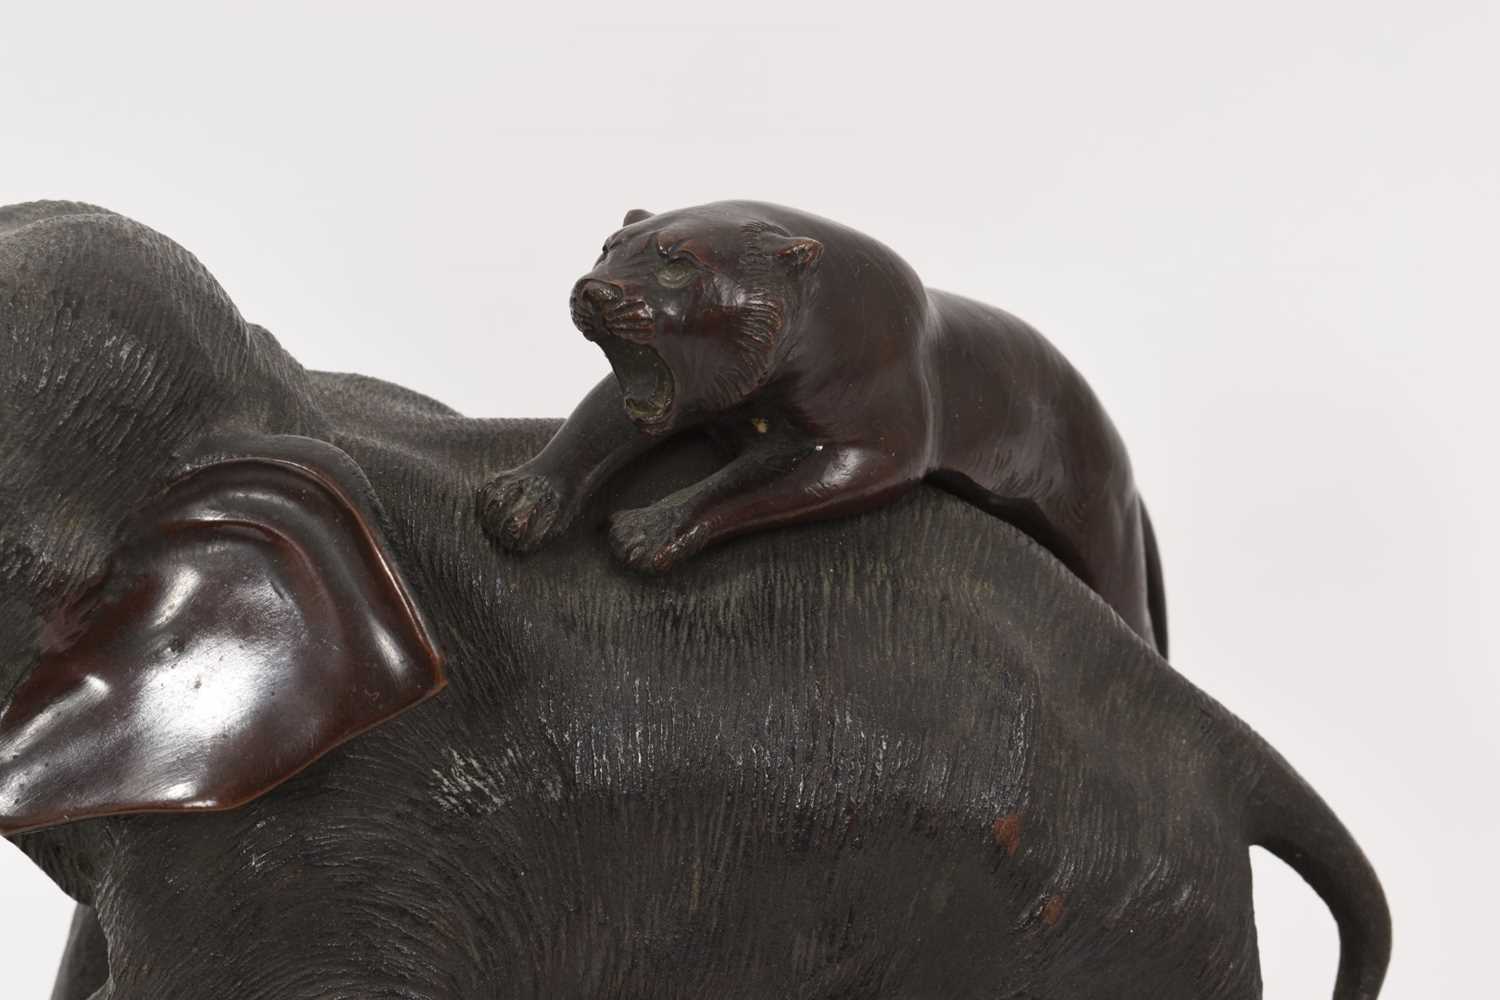 Late 19th century/early 20th century Japanese bronze sculpture of an elephant - Image 4 of 5